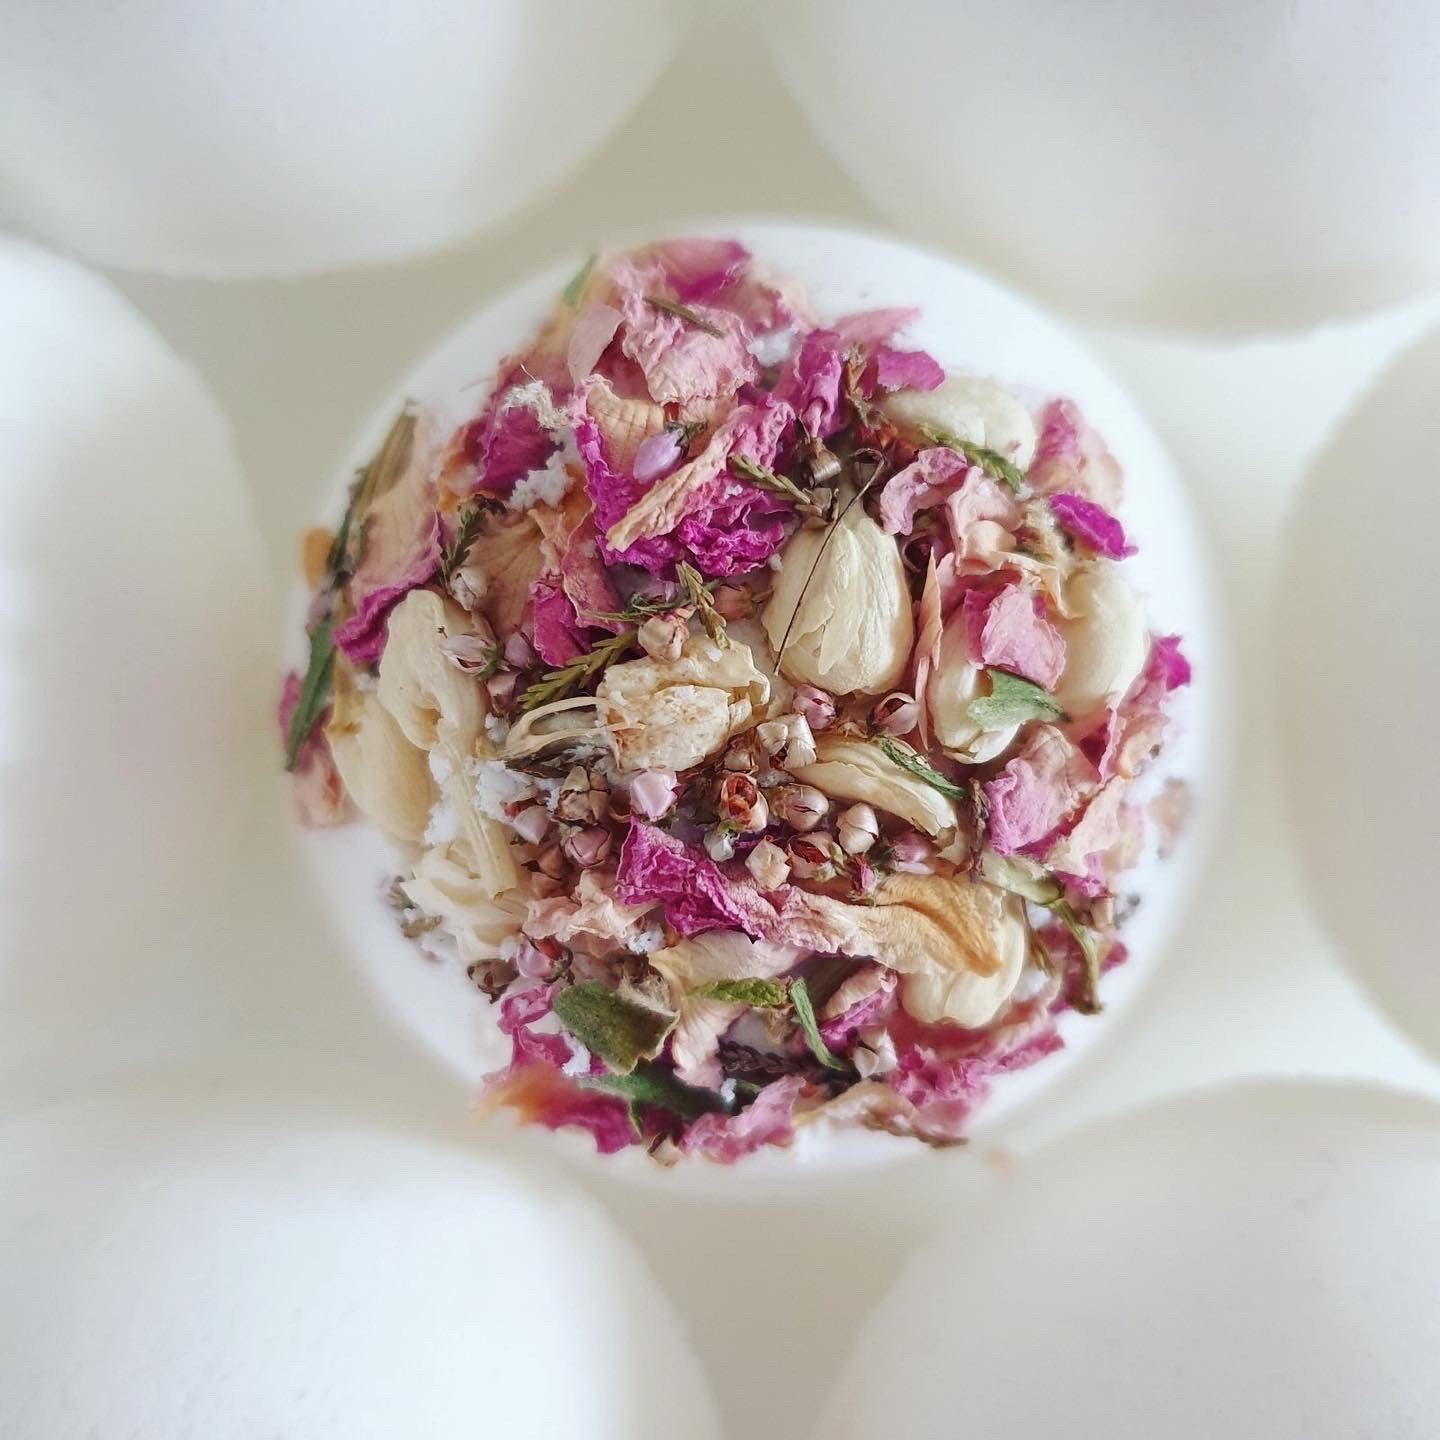 Posy Secret Bath Bomb for emotional balance with geranium, maritime pine and Ylang-ylang essential oils, decorated with dried flower petals.